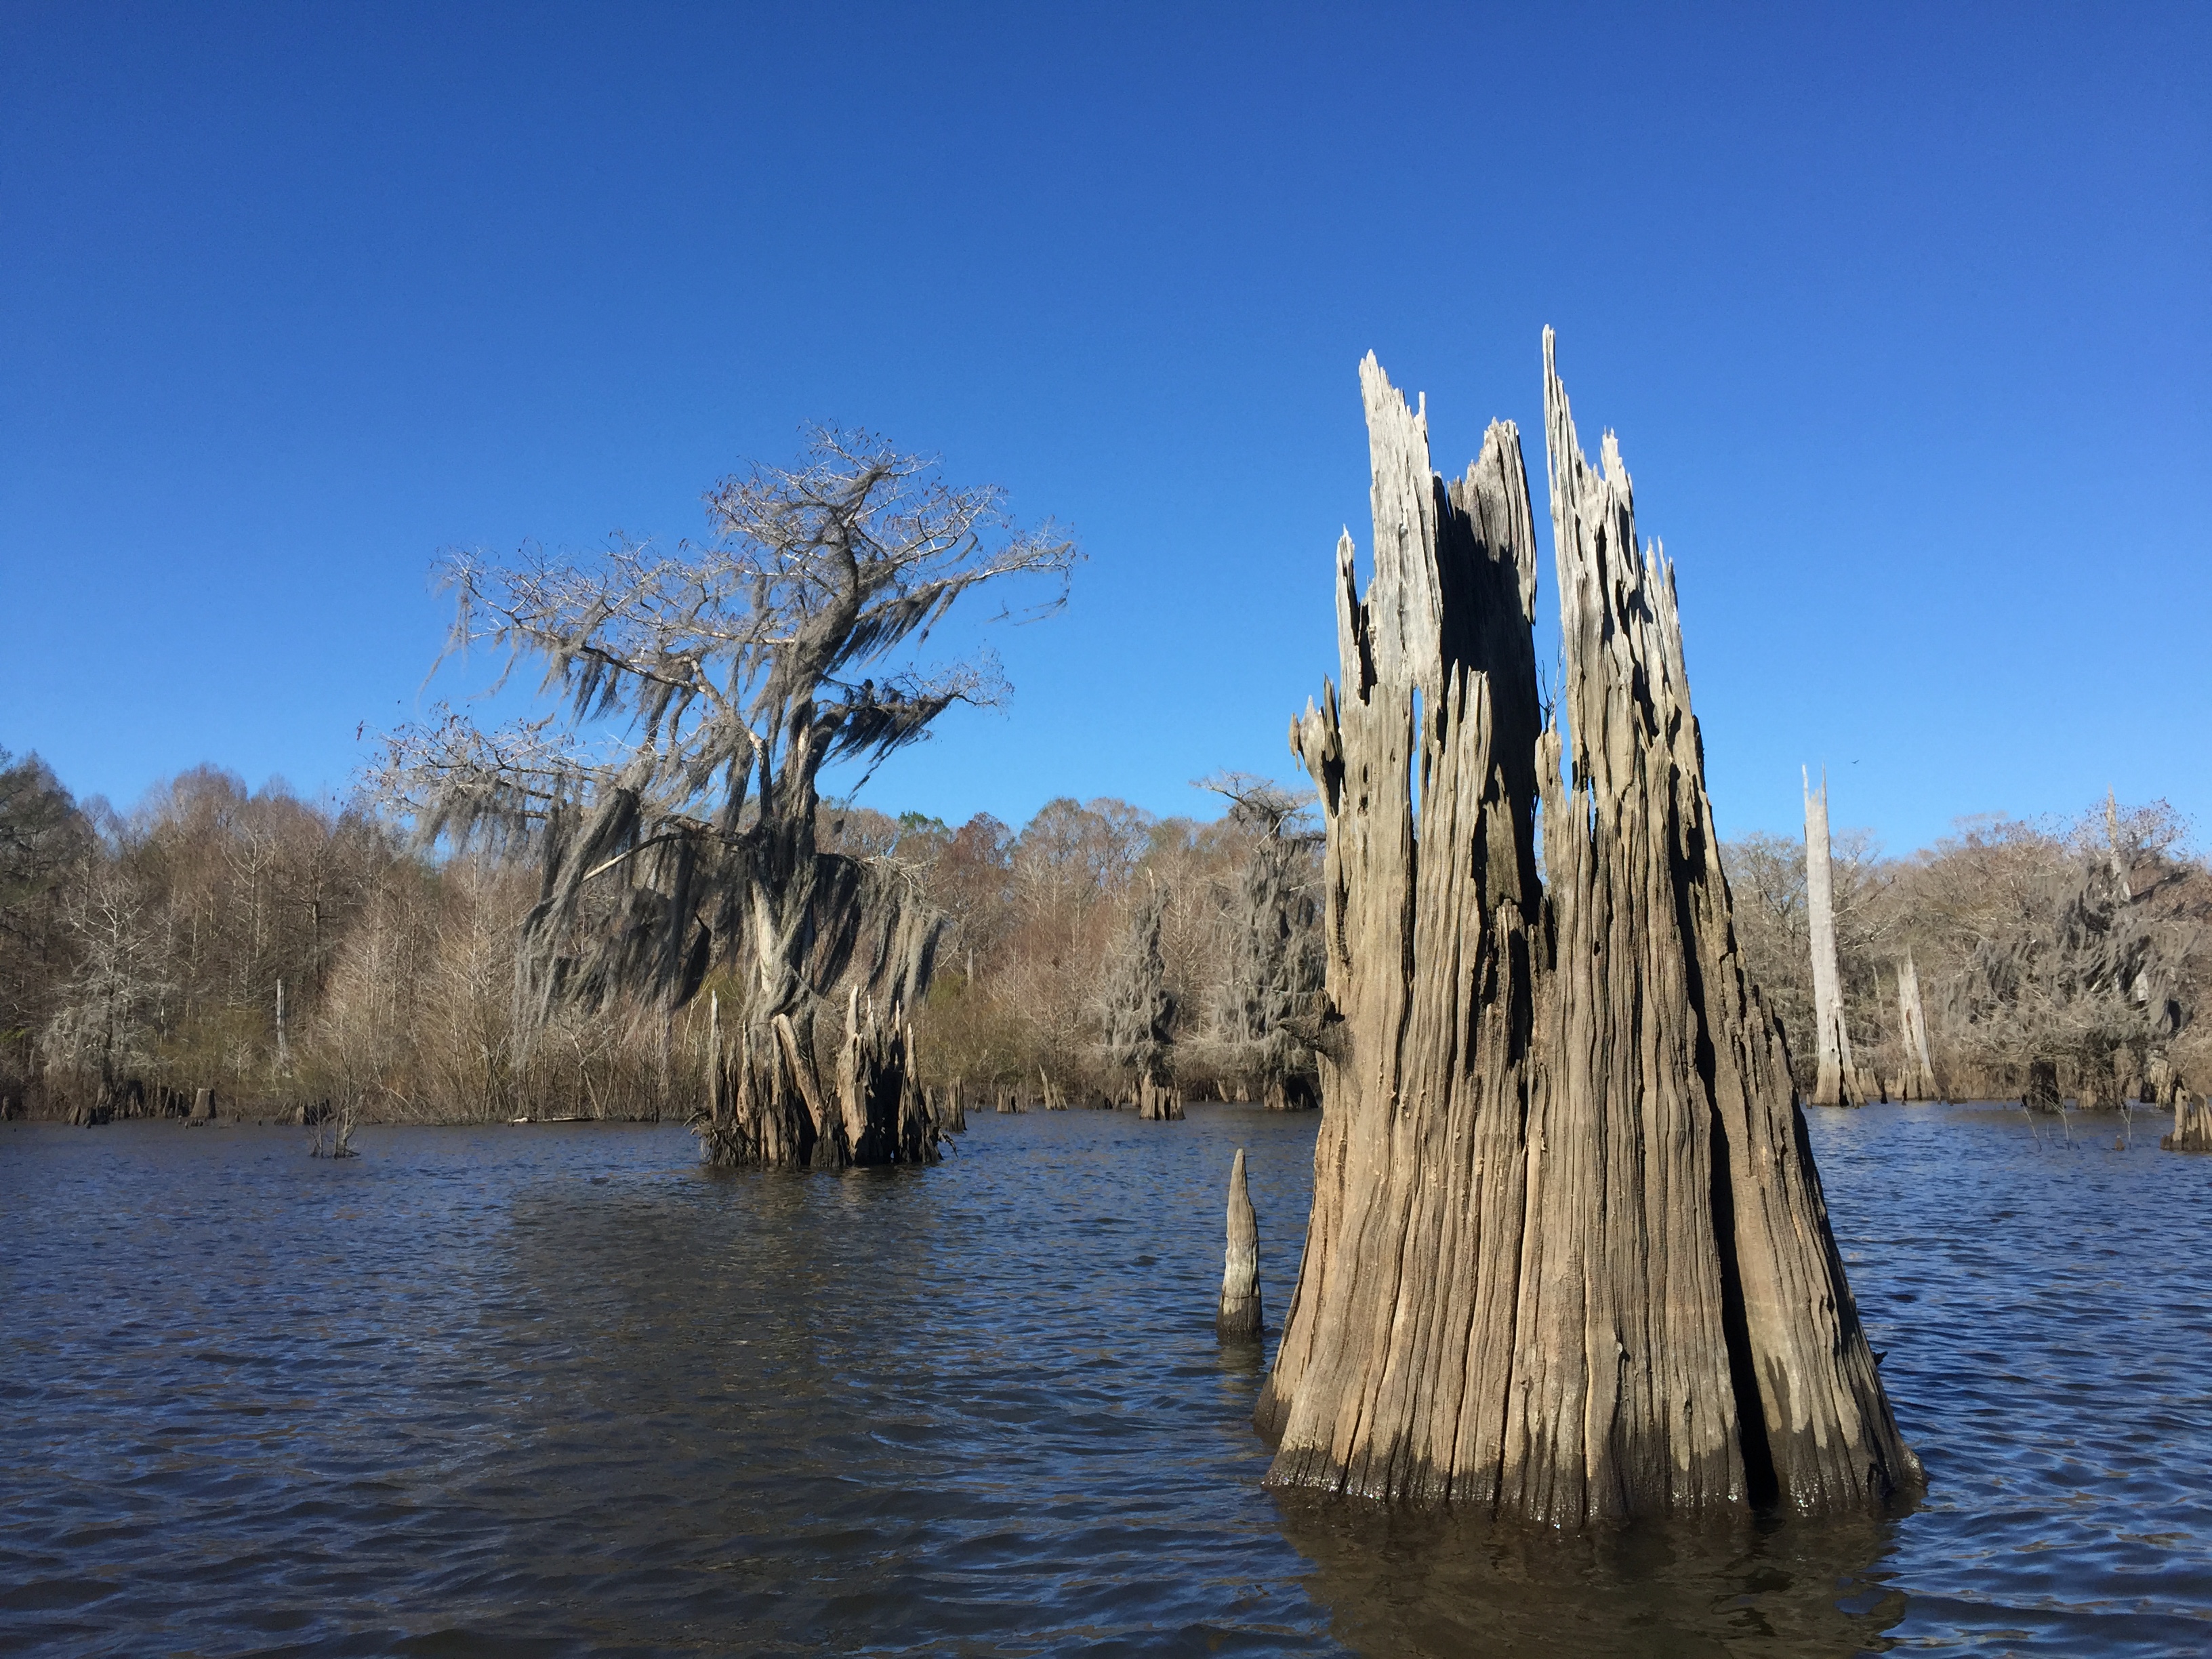 Big River: the Apalachicola – National Geographic Blog